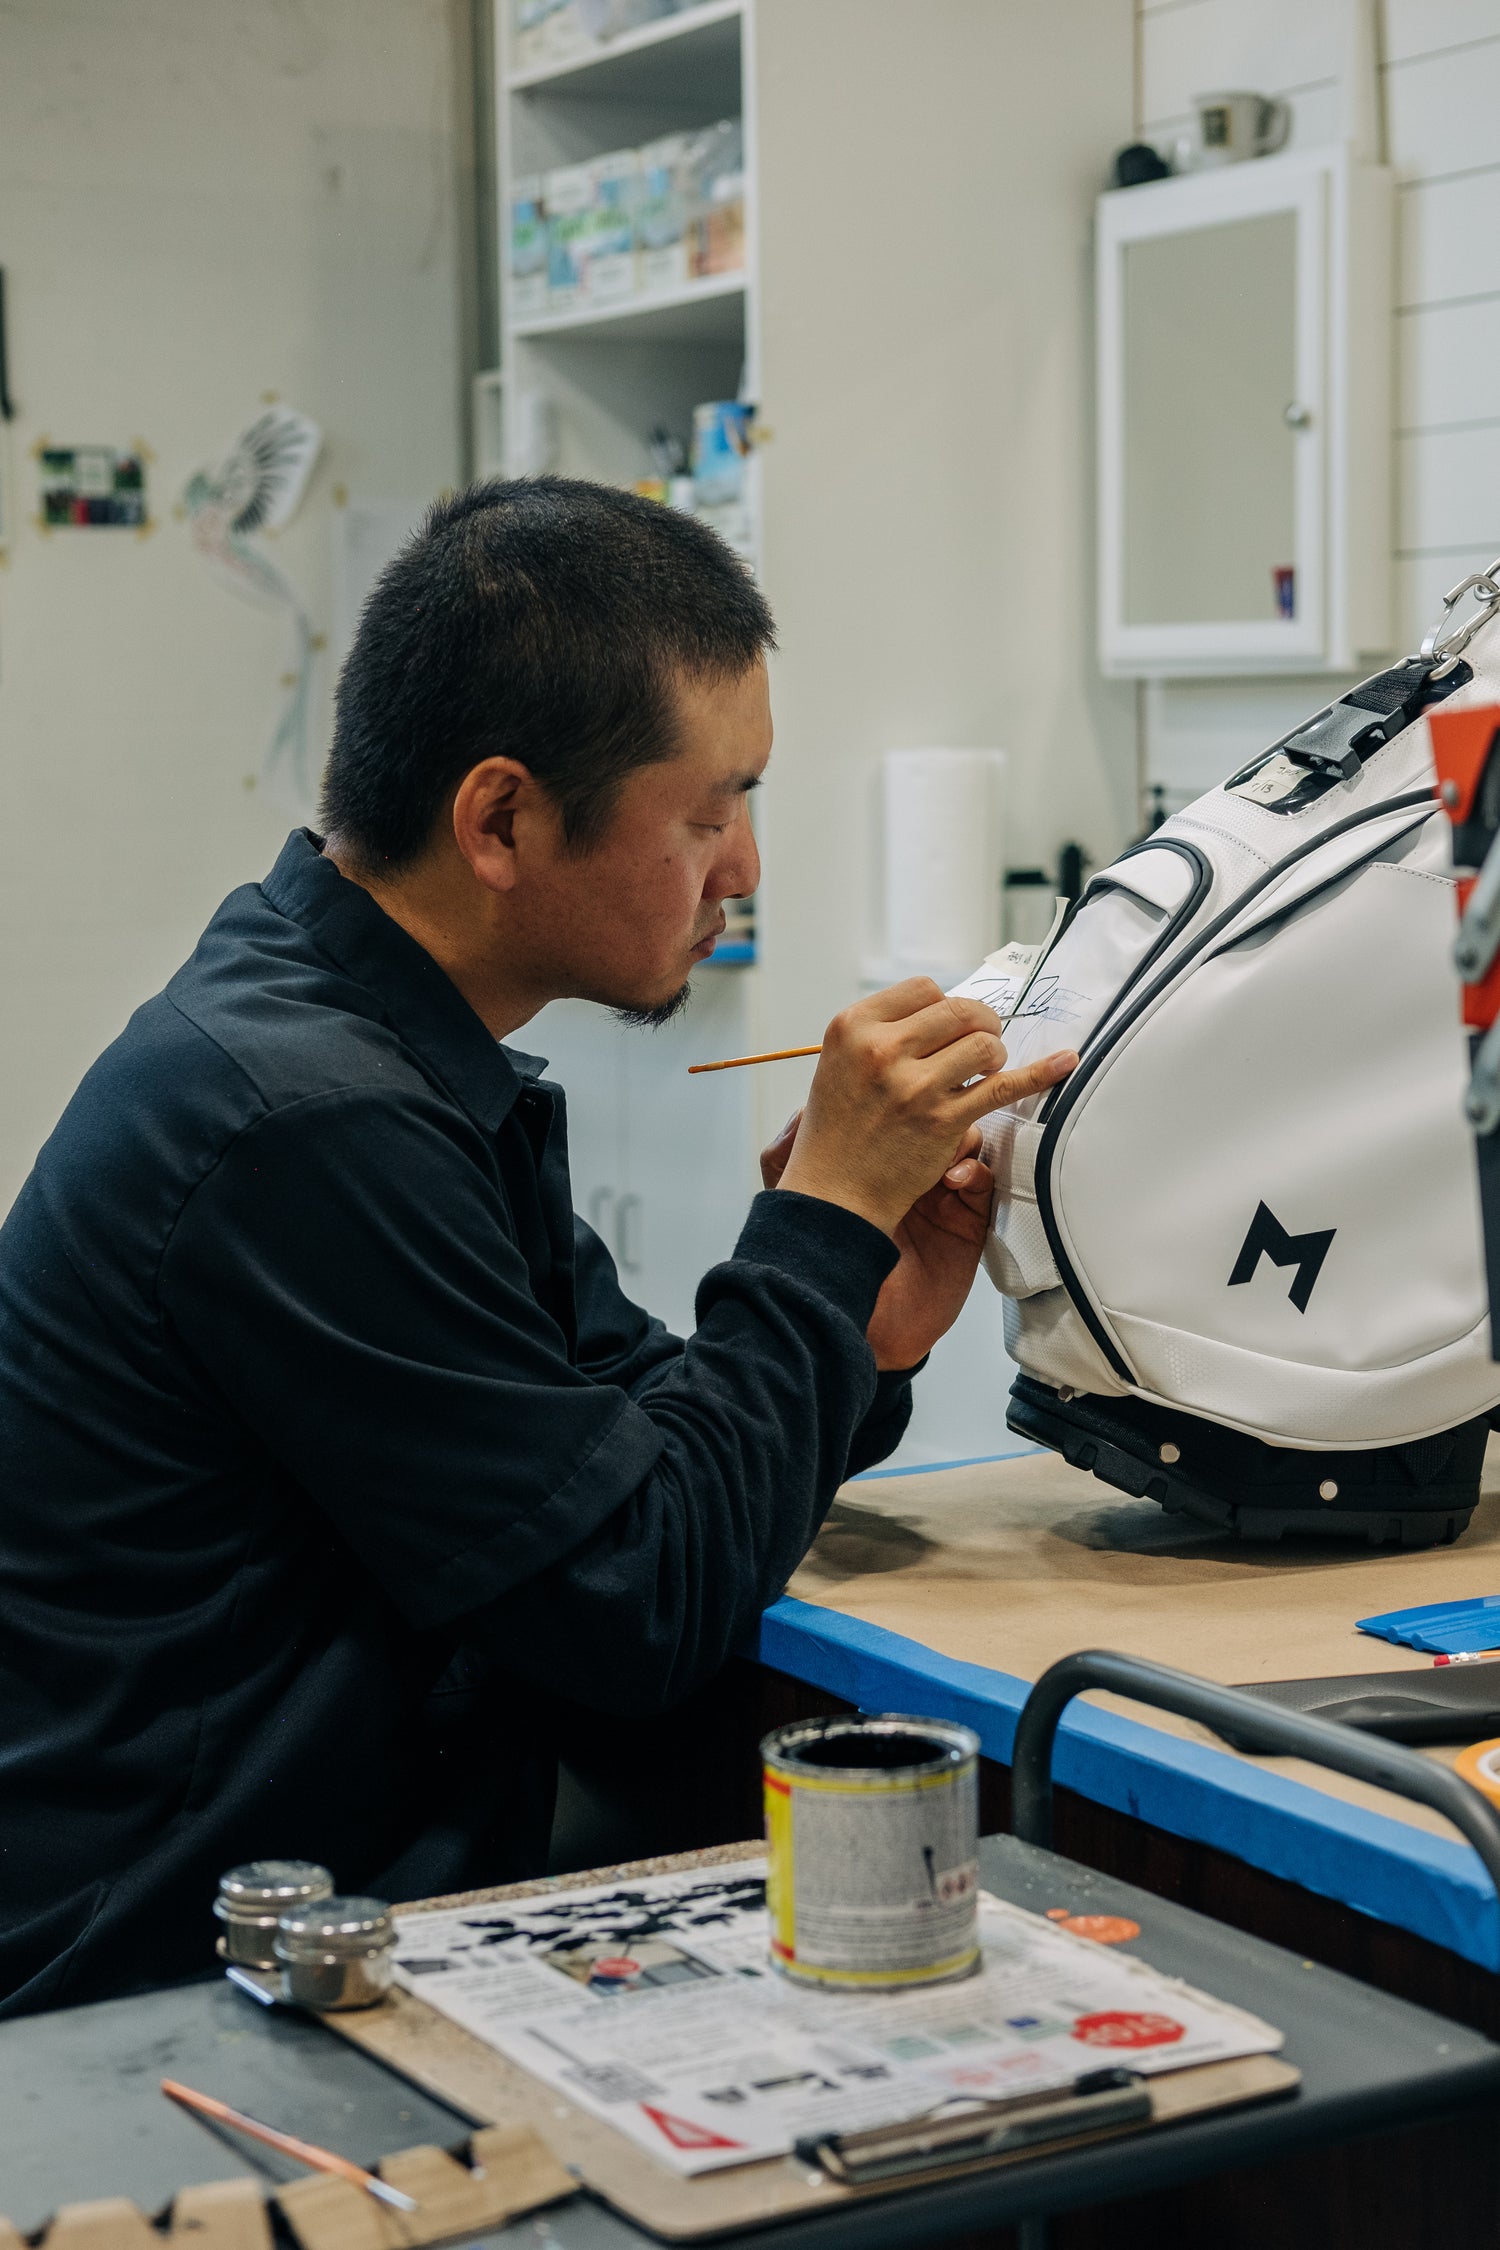 mnml golf offers golf bag customization, with hand painted artwork by certified artist.